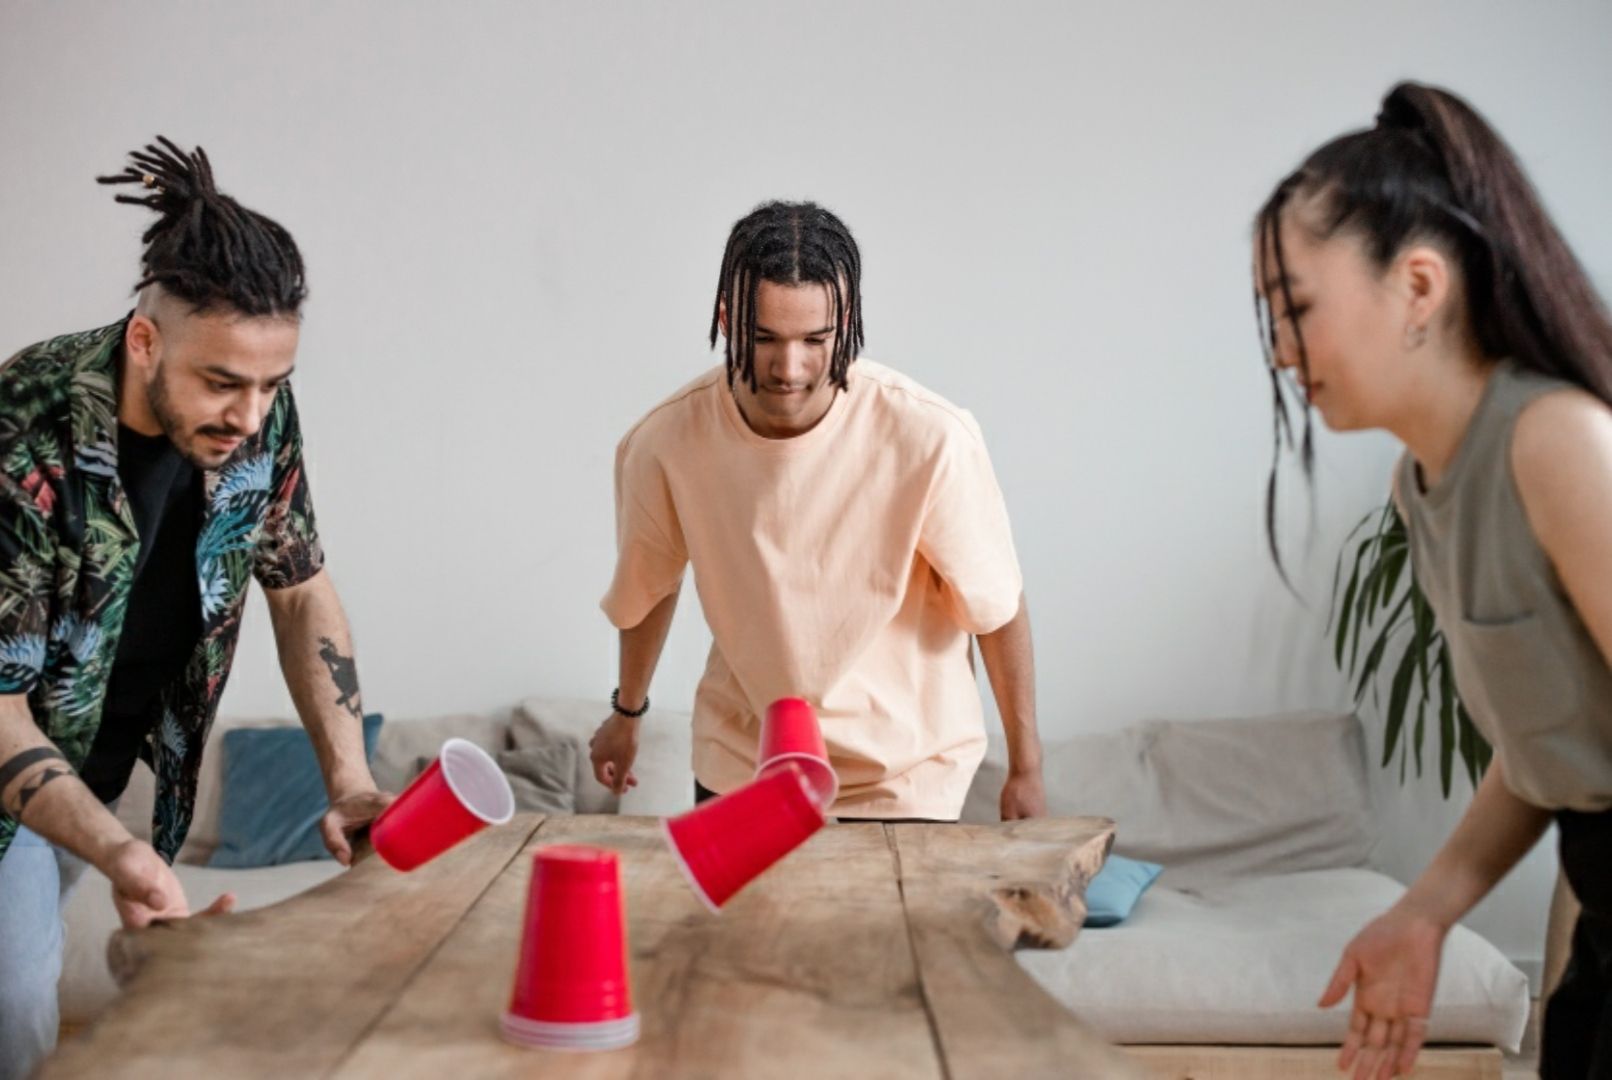 Photo by Ron Lach : https://www.pexels.com/photo/group-of-friends-playing-using-red-plastic-cups-8368342/